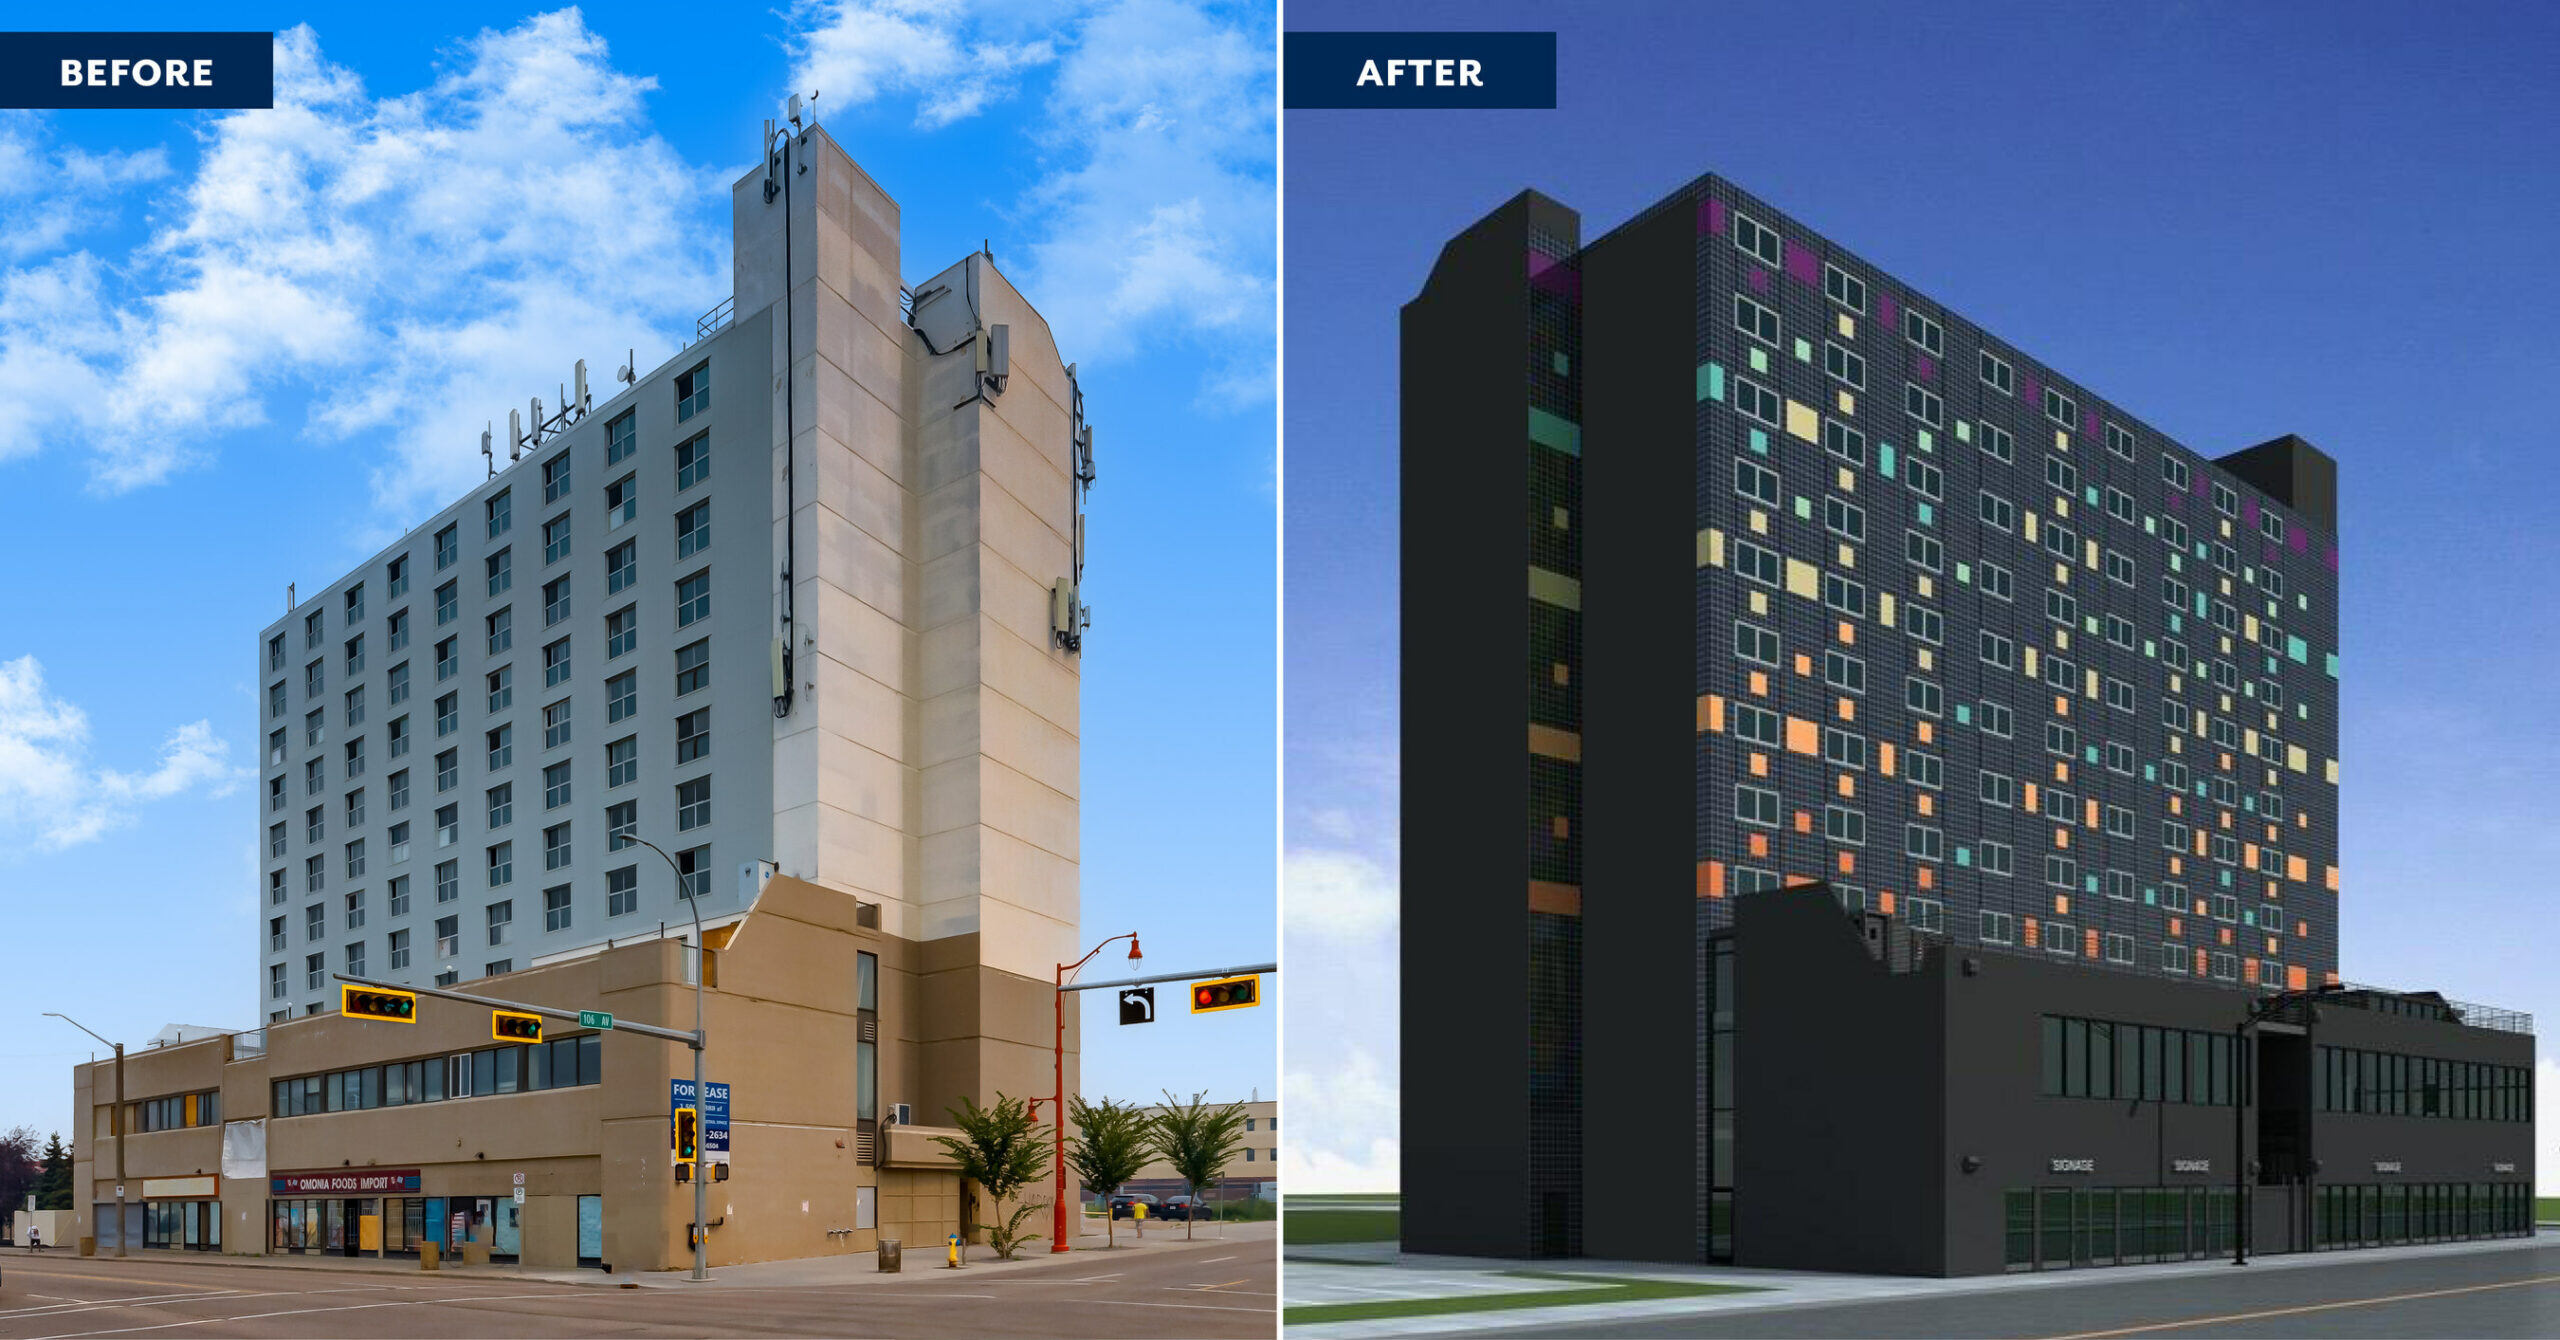 A First in Western Canada: Avenue Living Leverages BMO’s Retrofit Program to Add 179 New Rental Units in Downtown Edmonton